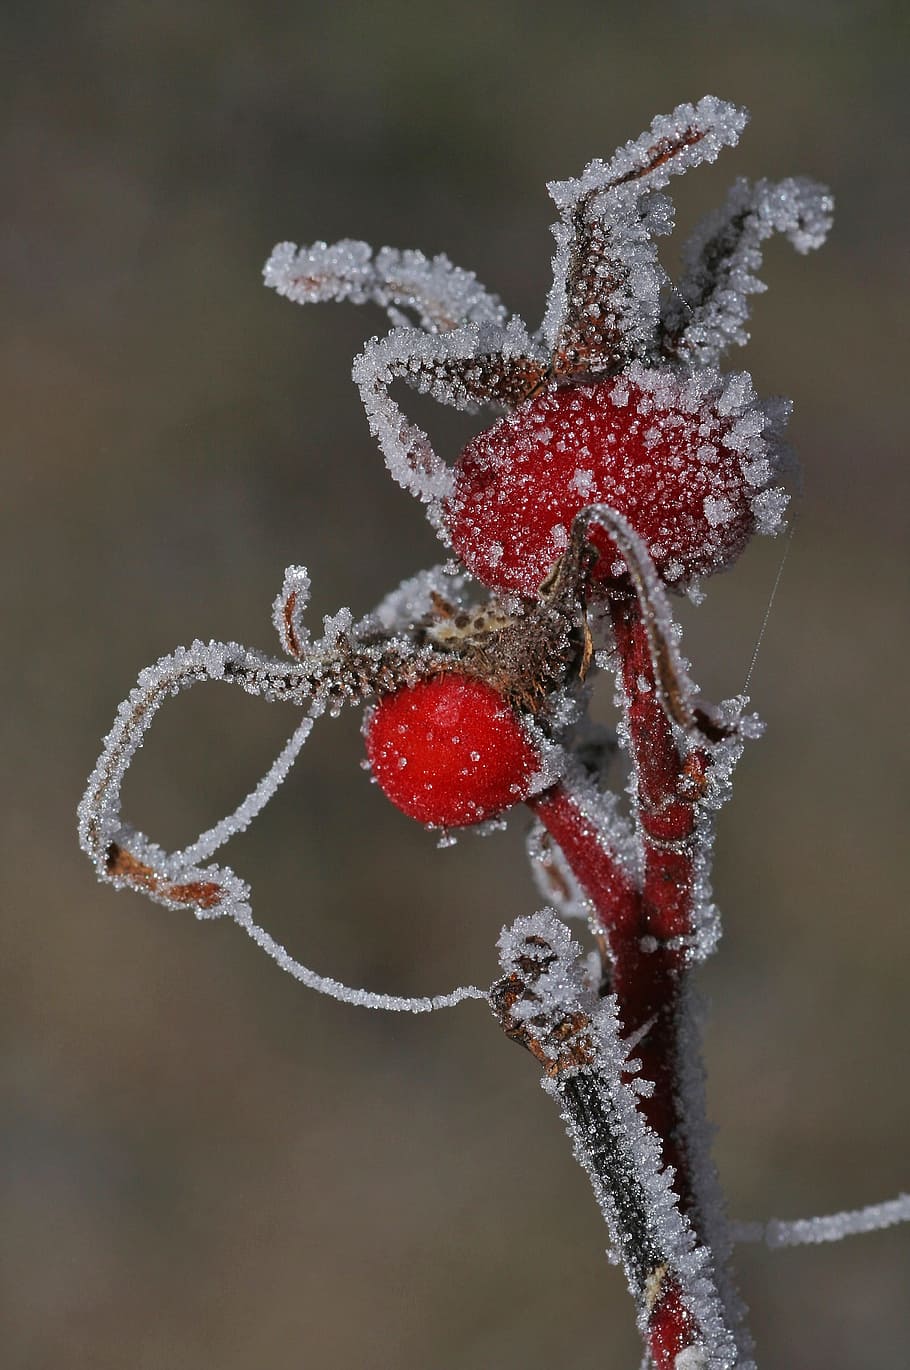 Rose Hip, Fruit, Plant, Berry, Ice, frost, ripe, cold, winter, frozen